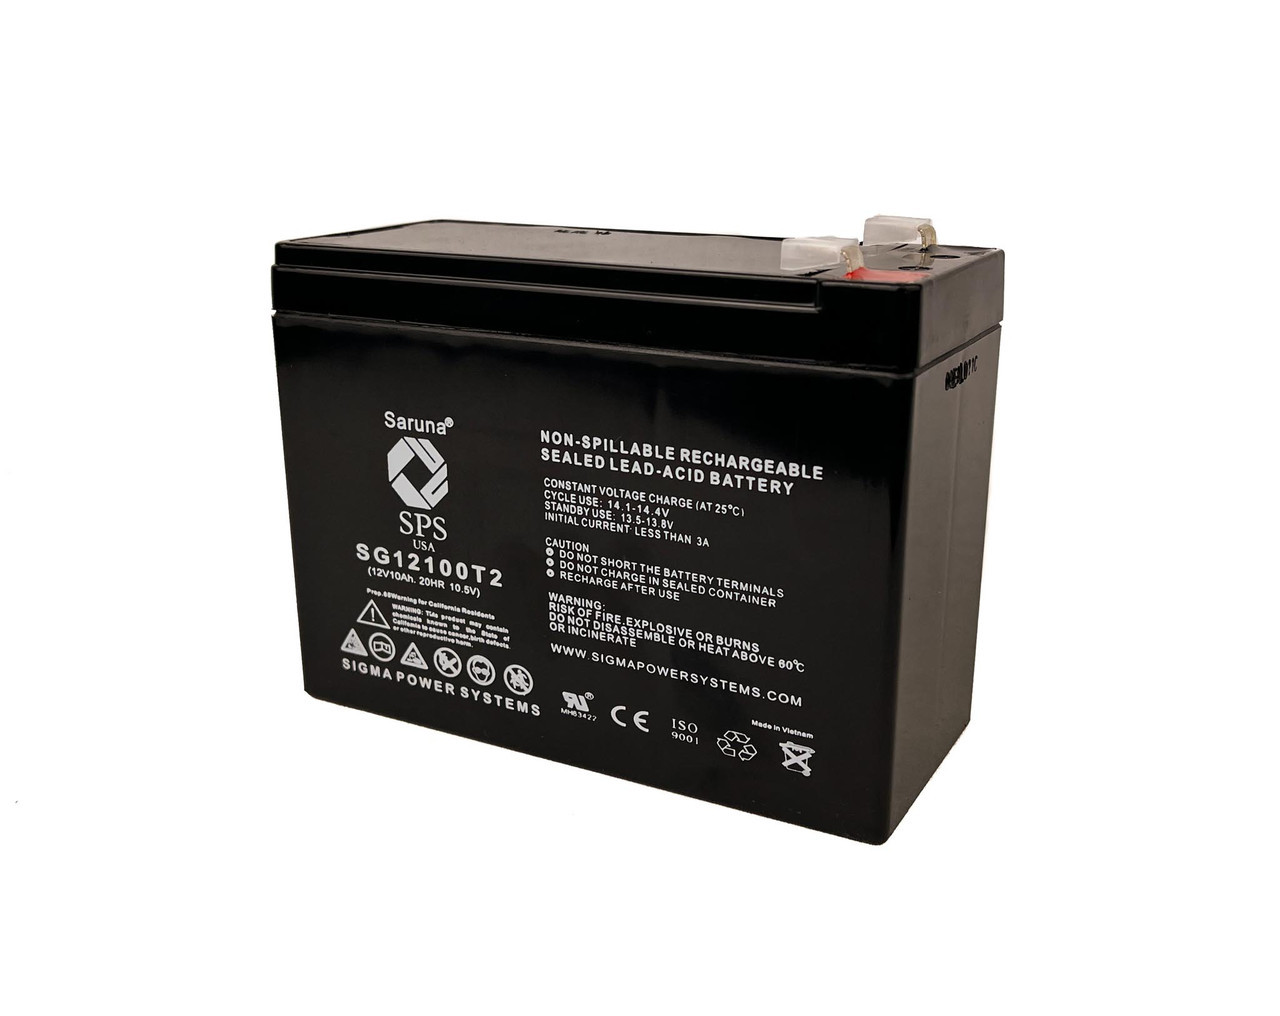 Raion Power 12V 10Ah Non-Spillable Replacement Rechargebale Battery for Napel NP12100